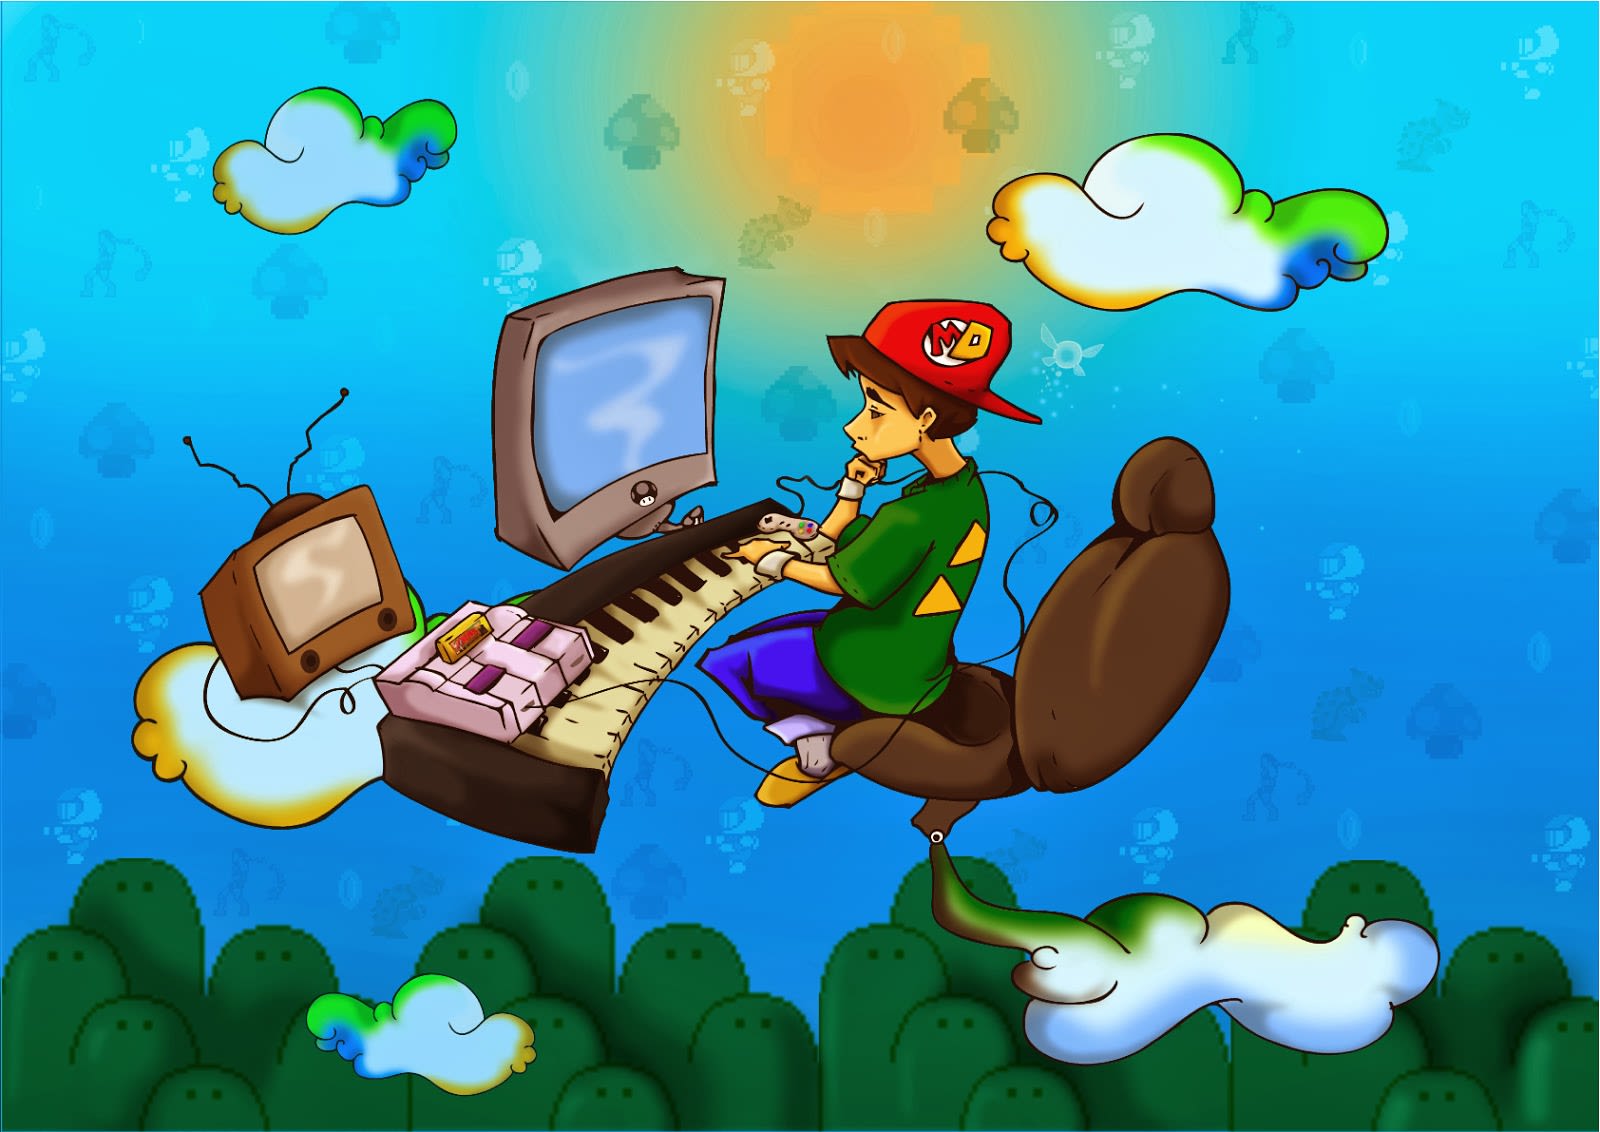 Artwork of a boy sitting at a computer with a musical keyboard